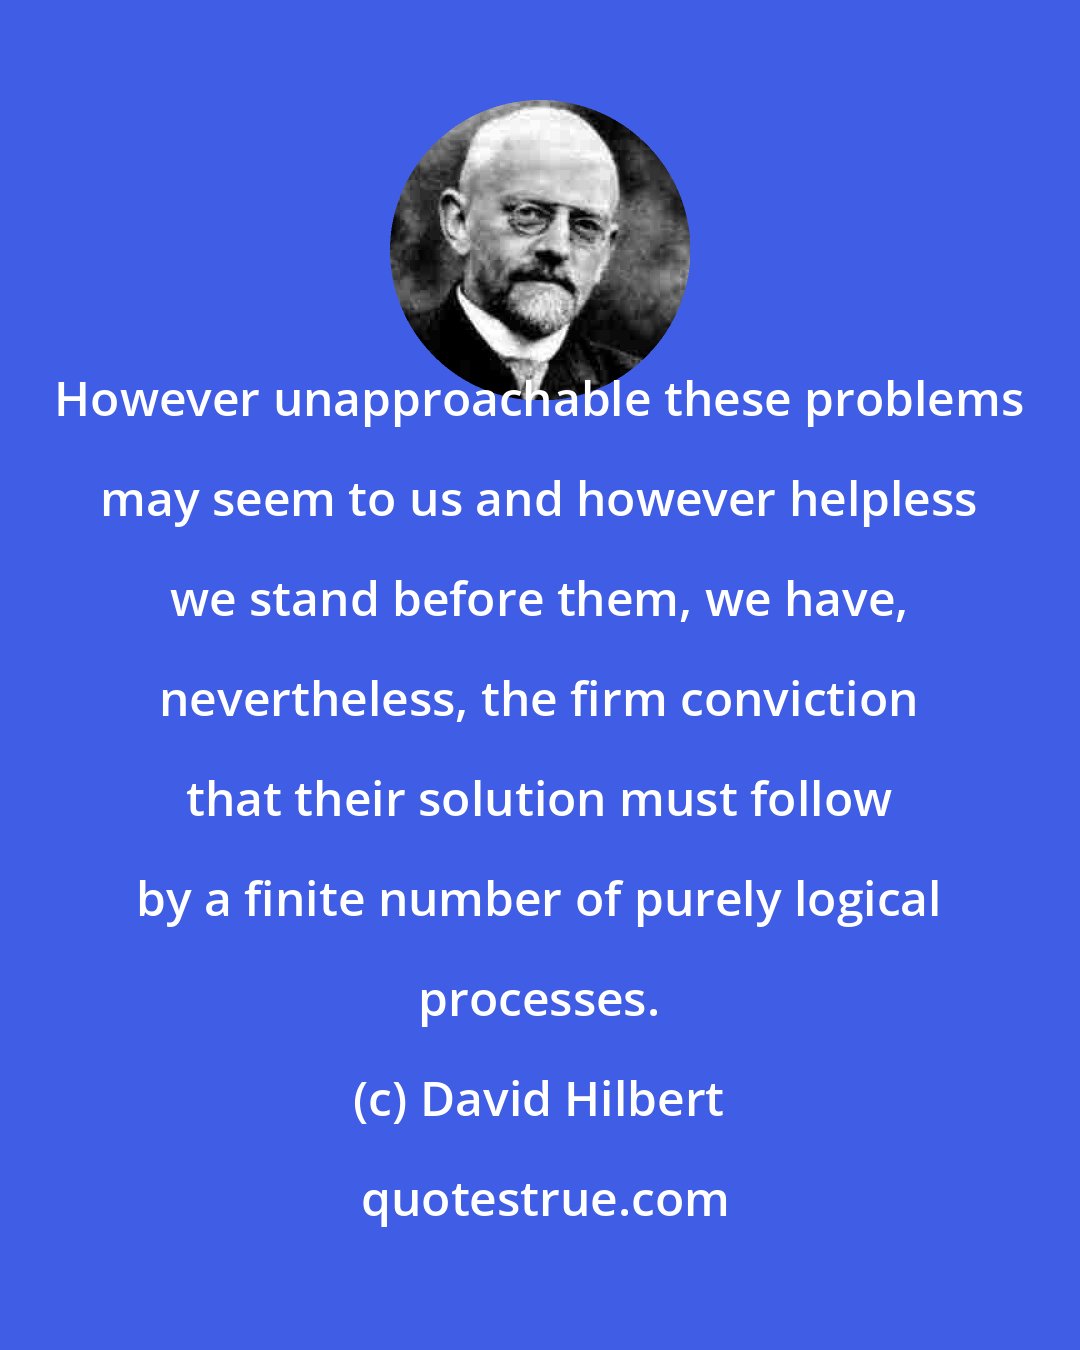 David Hilbert: However unapproachable these problems may seem to us and however helpless we stand before them, we have, nevertheless, the firm conviction that their solution must follow by a finite number of purely logical processes.